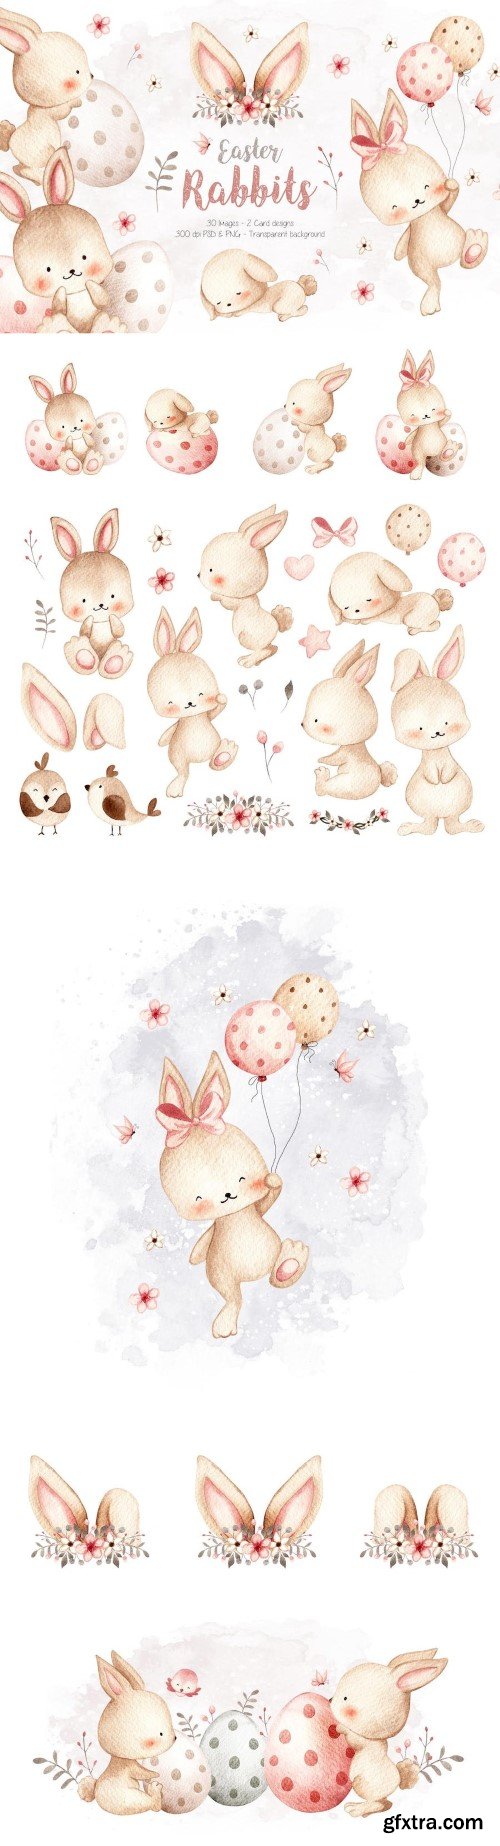 Watercolor Illustration Easter Rabbits and Element